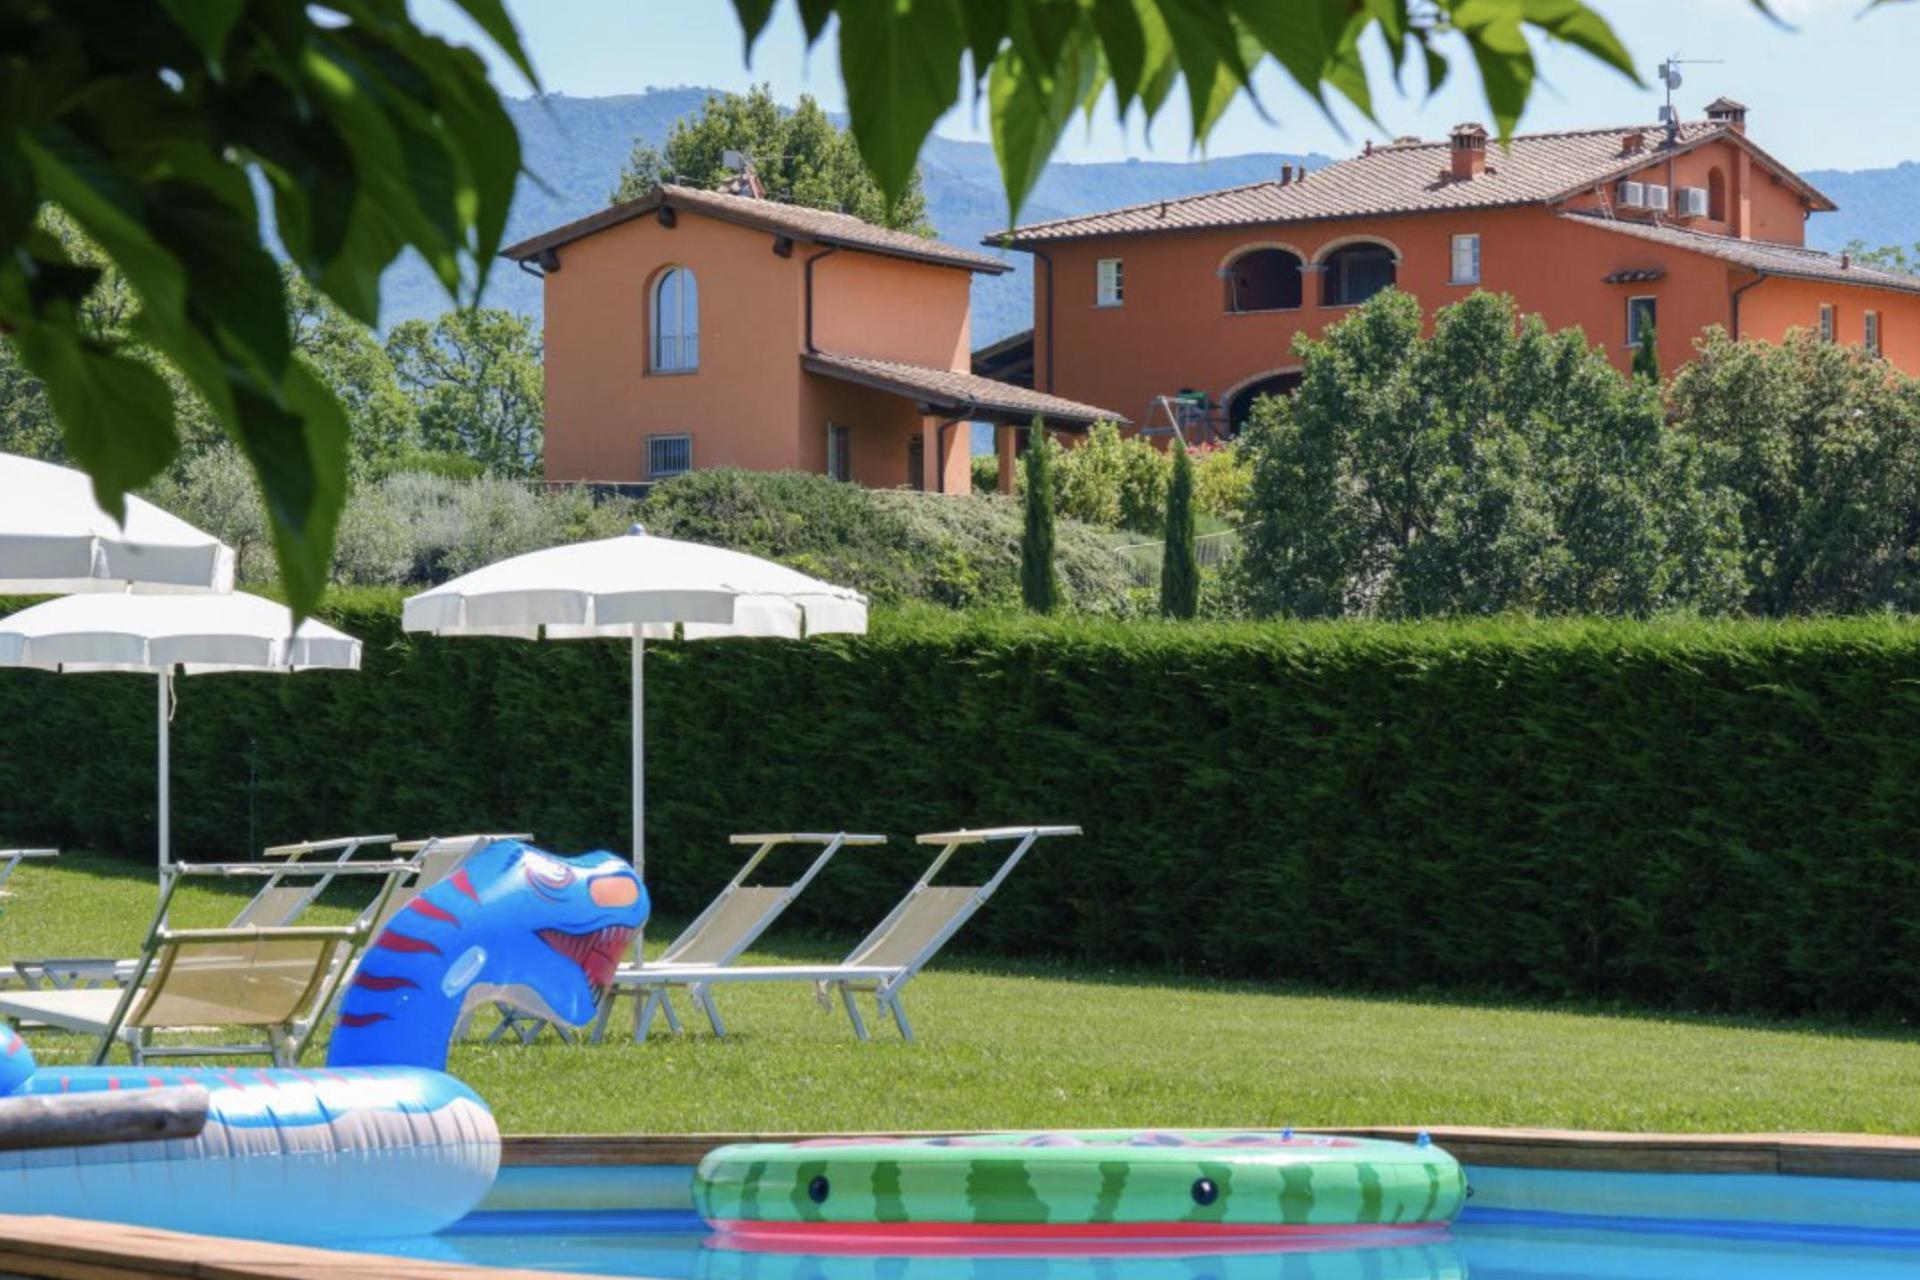 3. Child-friendly apartments in Tuscany